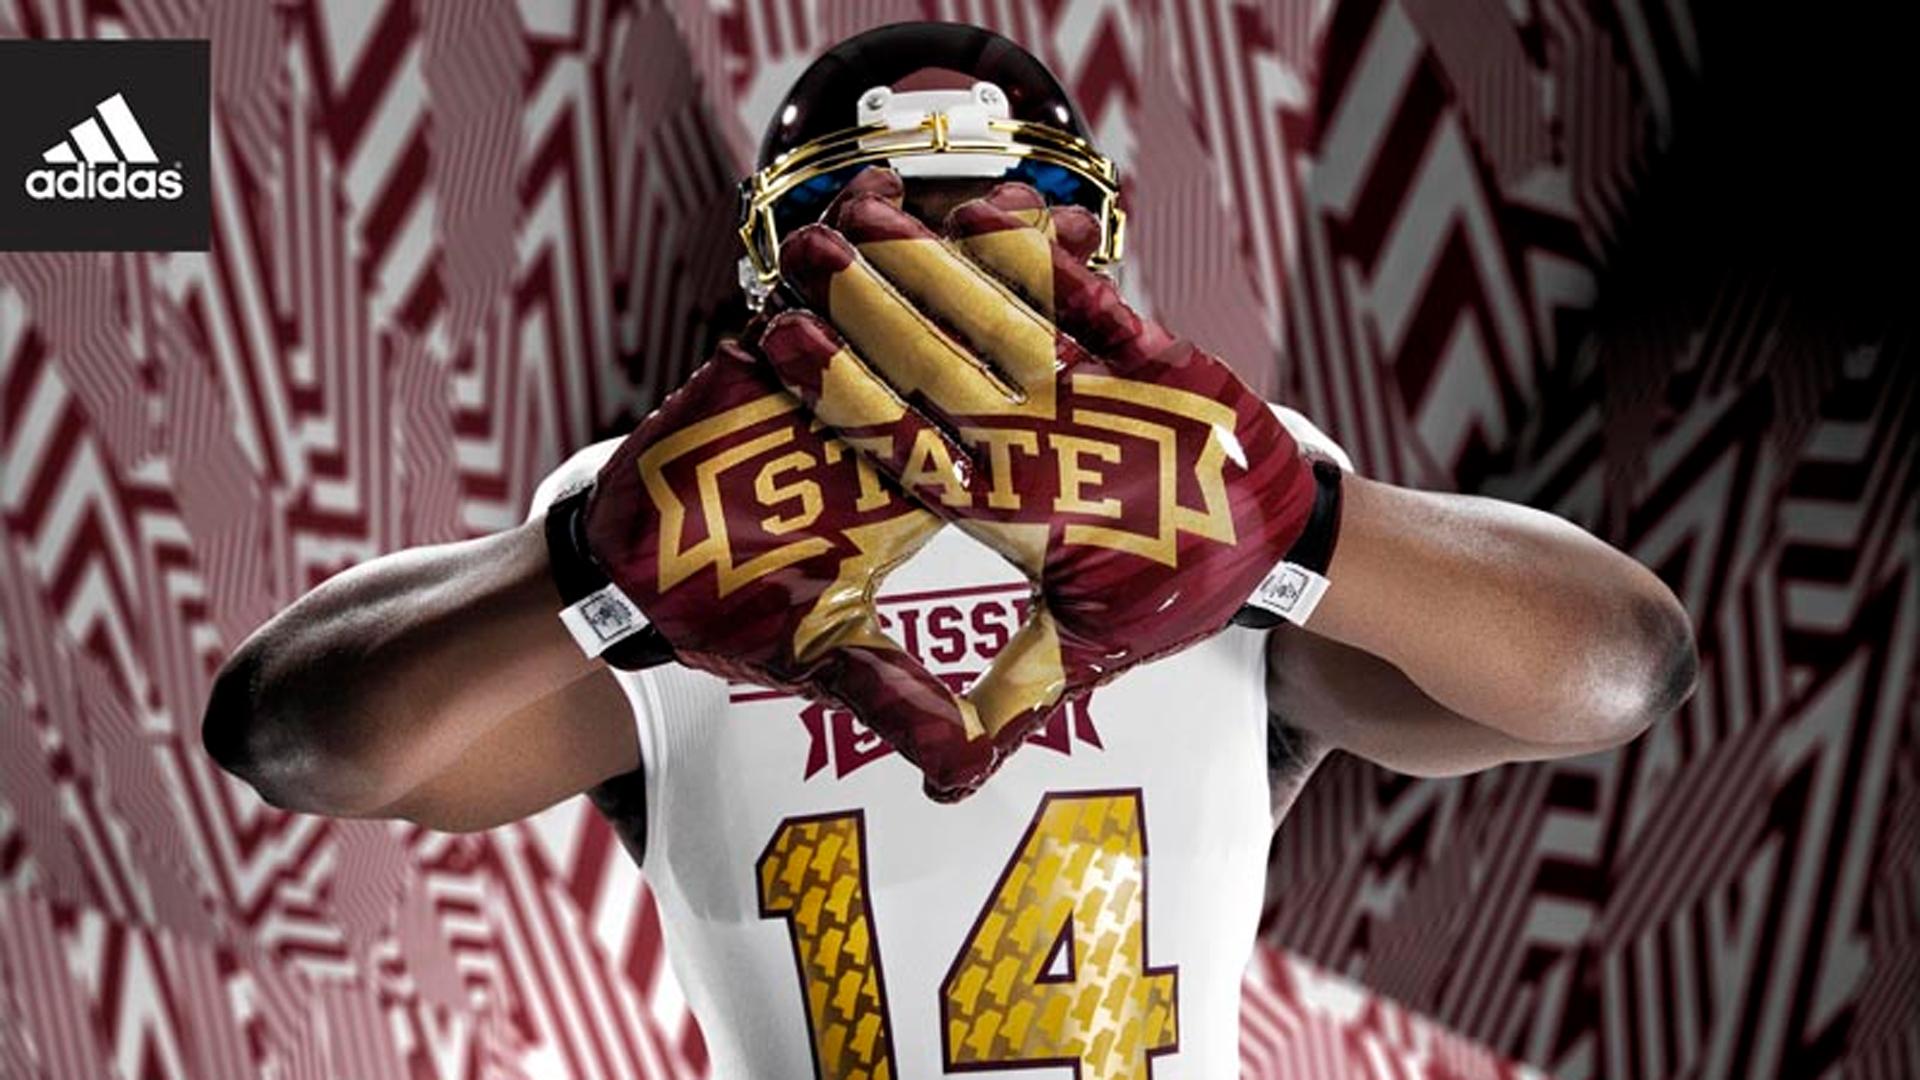 Mississippi State unveils new uniforms for Egg Bowl vs. Ole